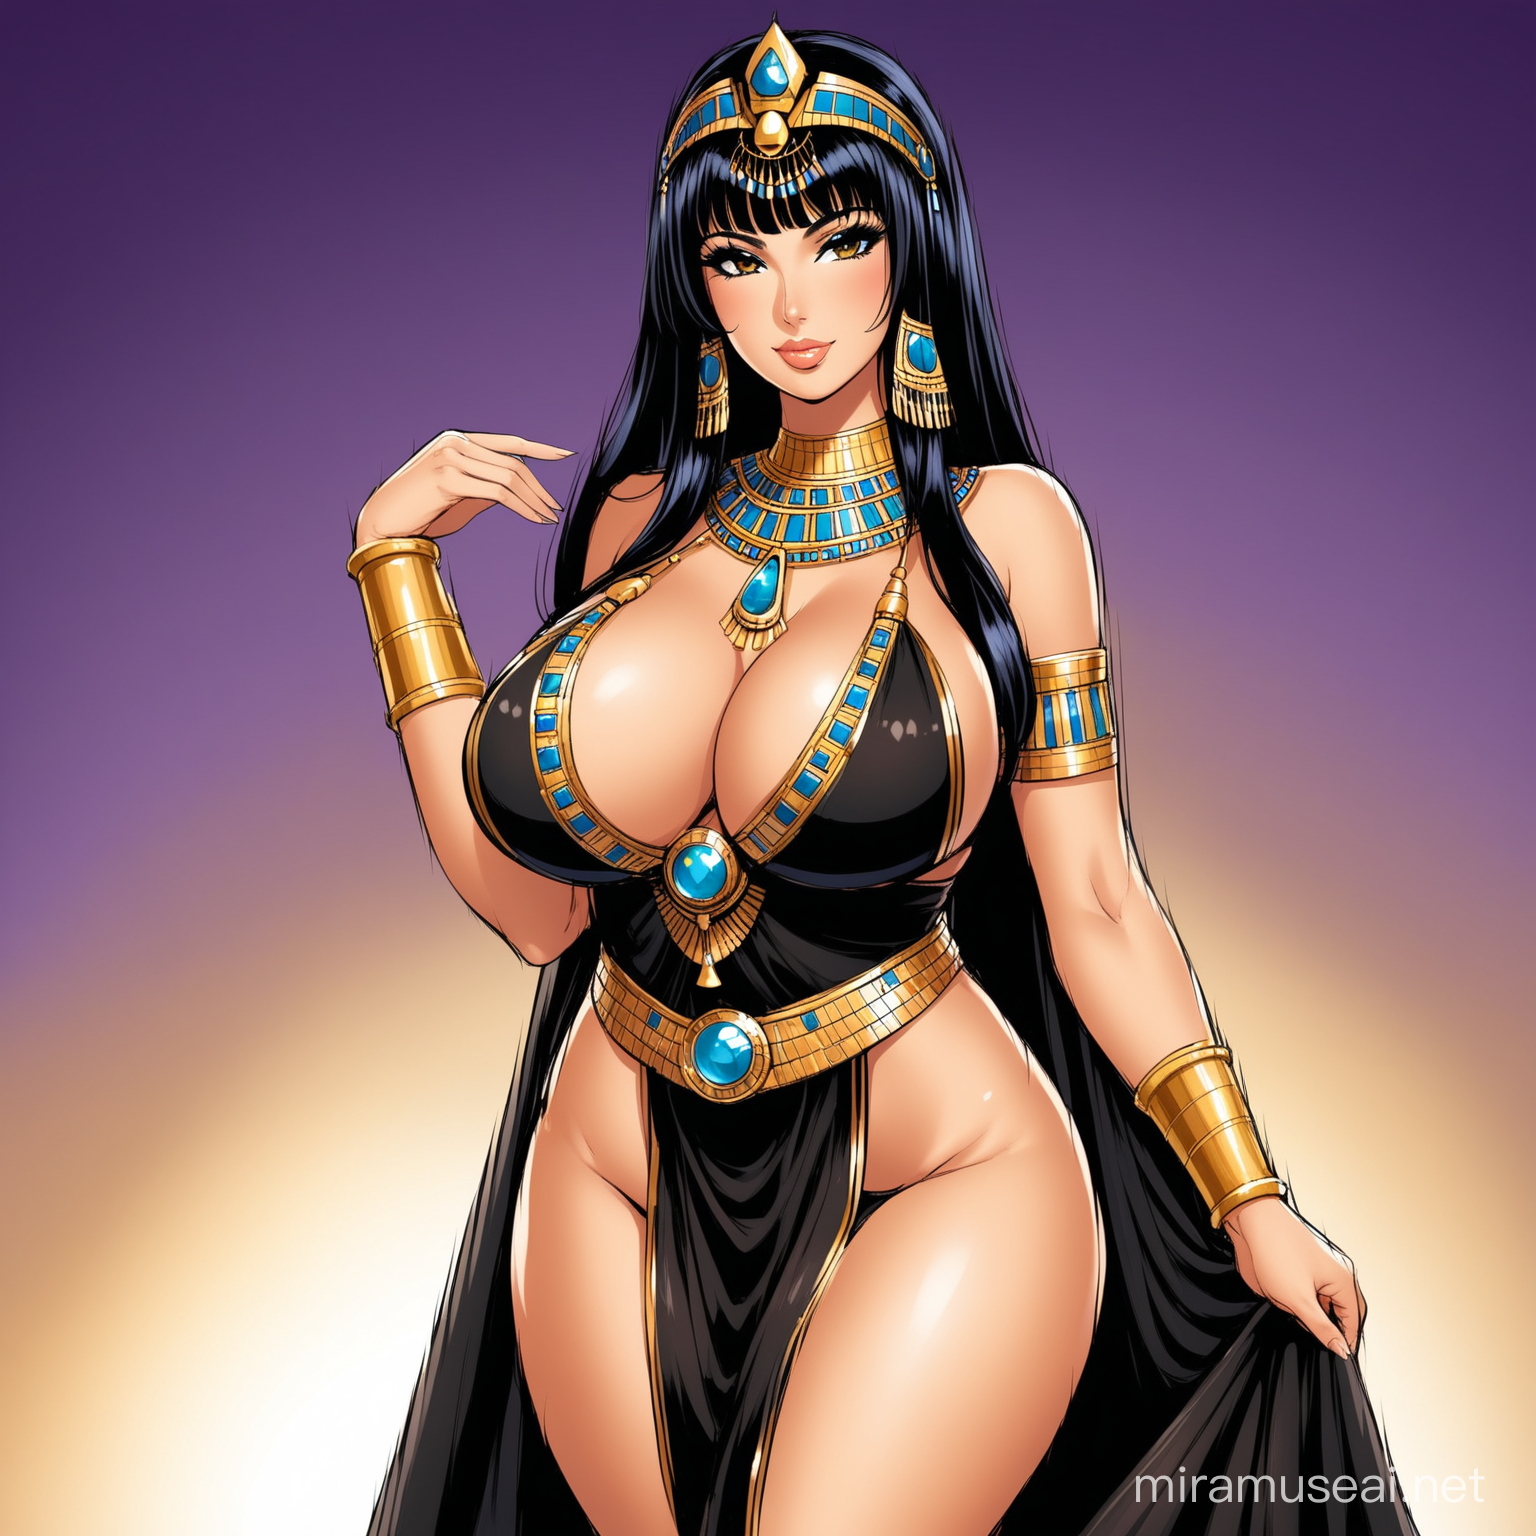  Busty and curvy Cleopatra with long black hair and diadem and egyptian gown looking like denise milani